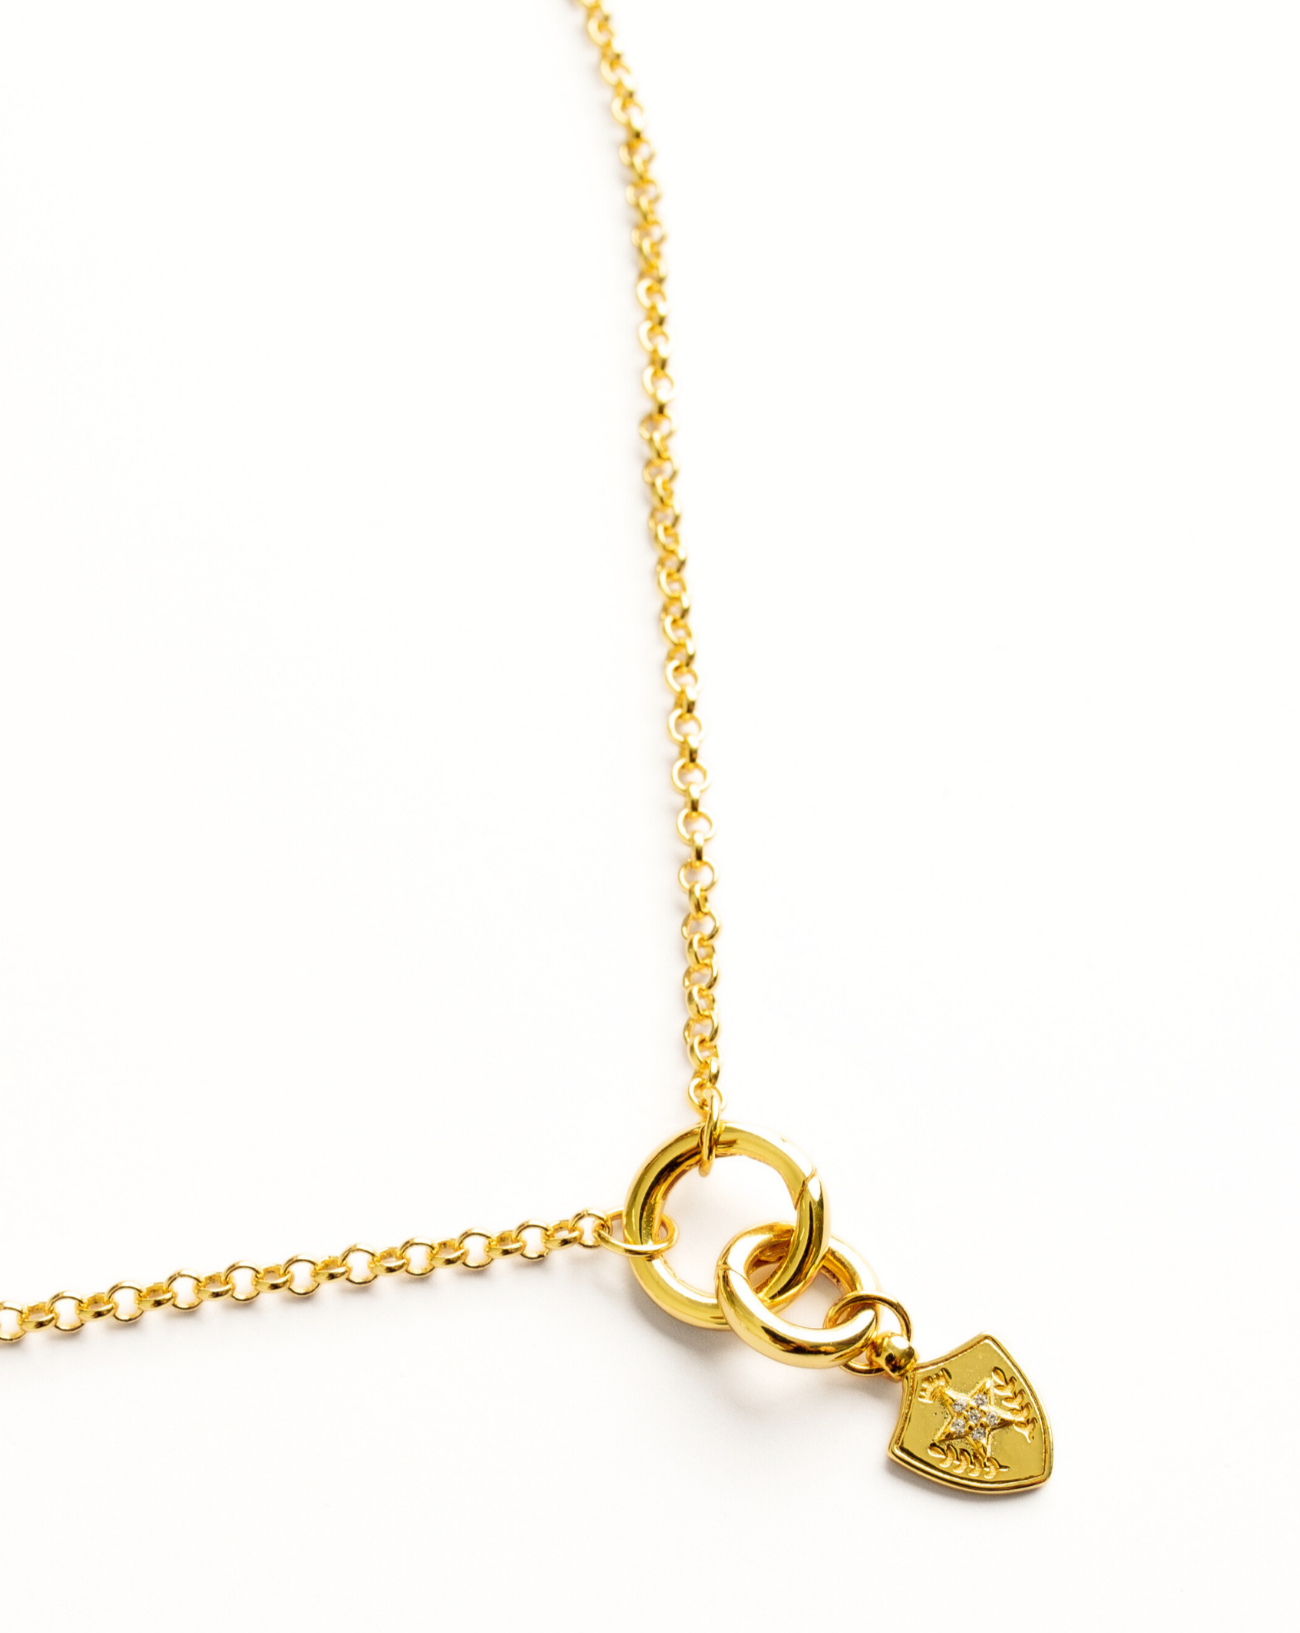 NEW ROLO CHAIN NECKLACE WITH ROUND LOCK (NO CHARM)